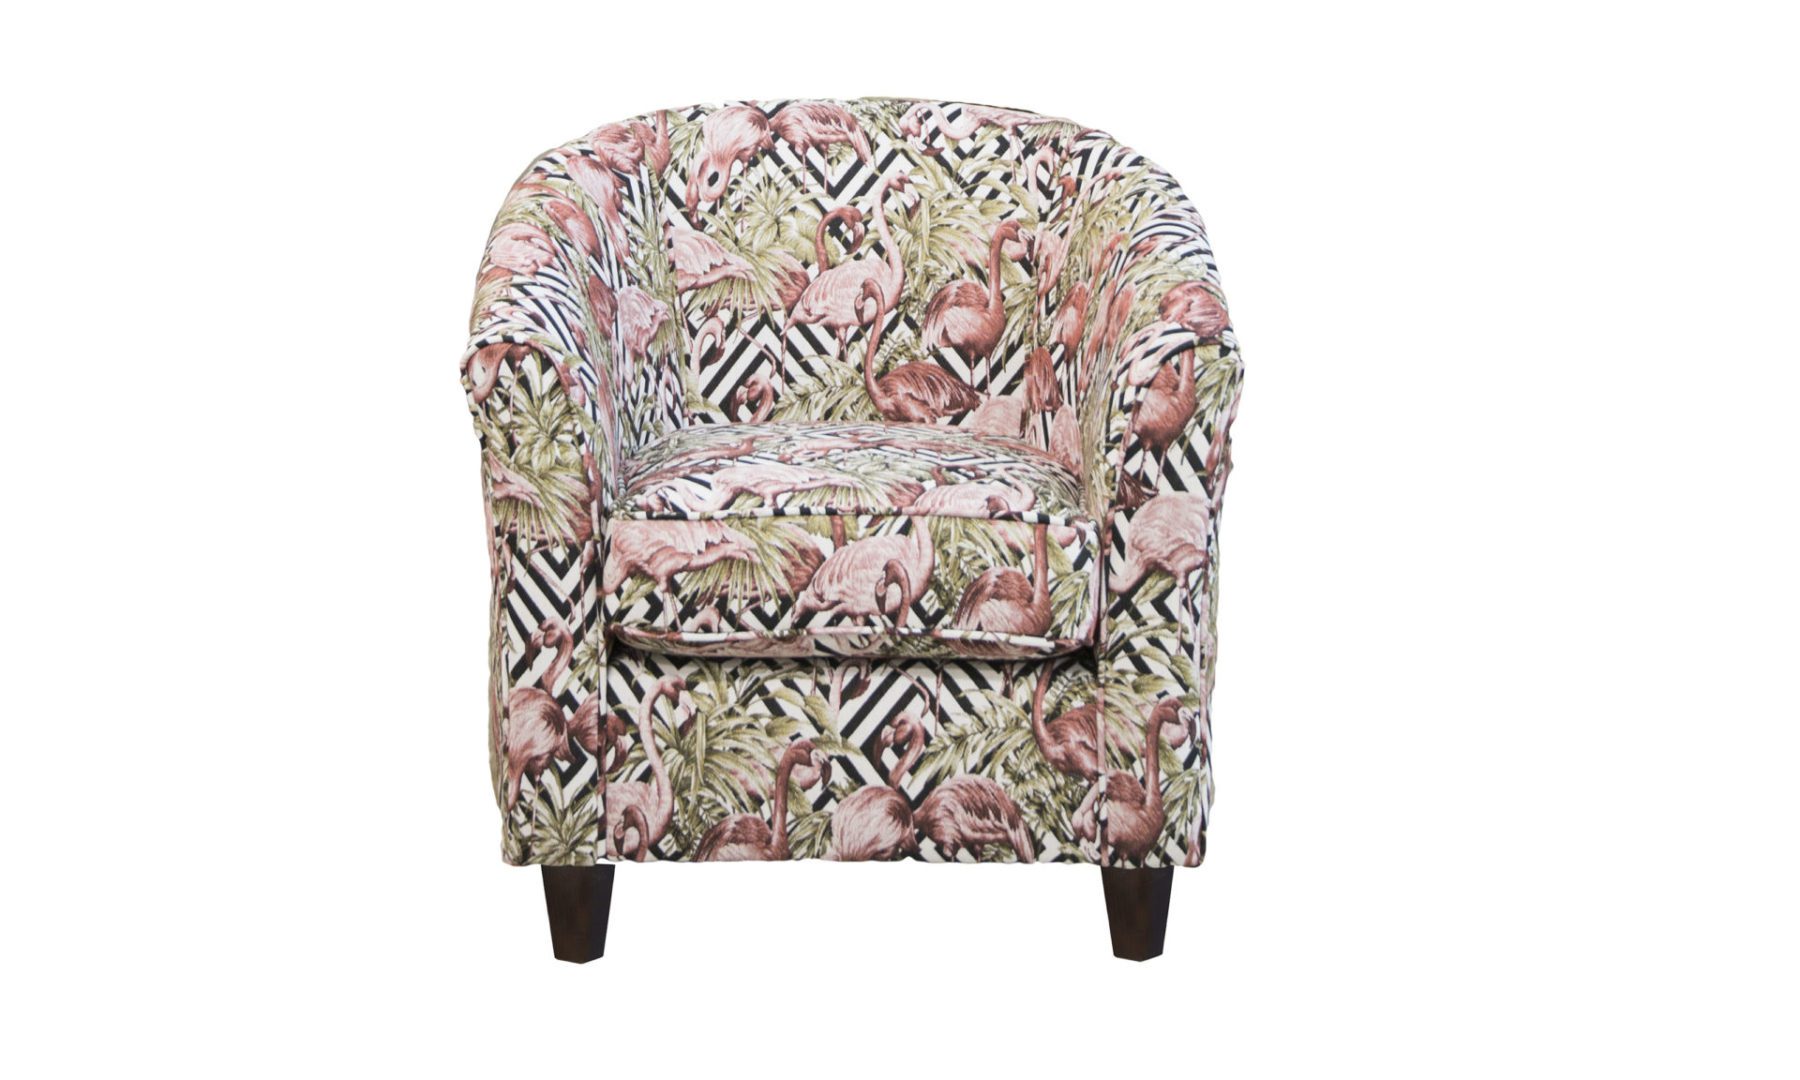 Tub Chair in Flamingo Brick, Gold Collection Fabric